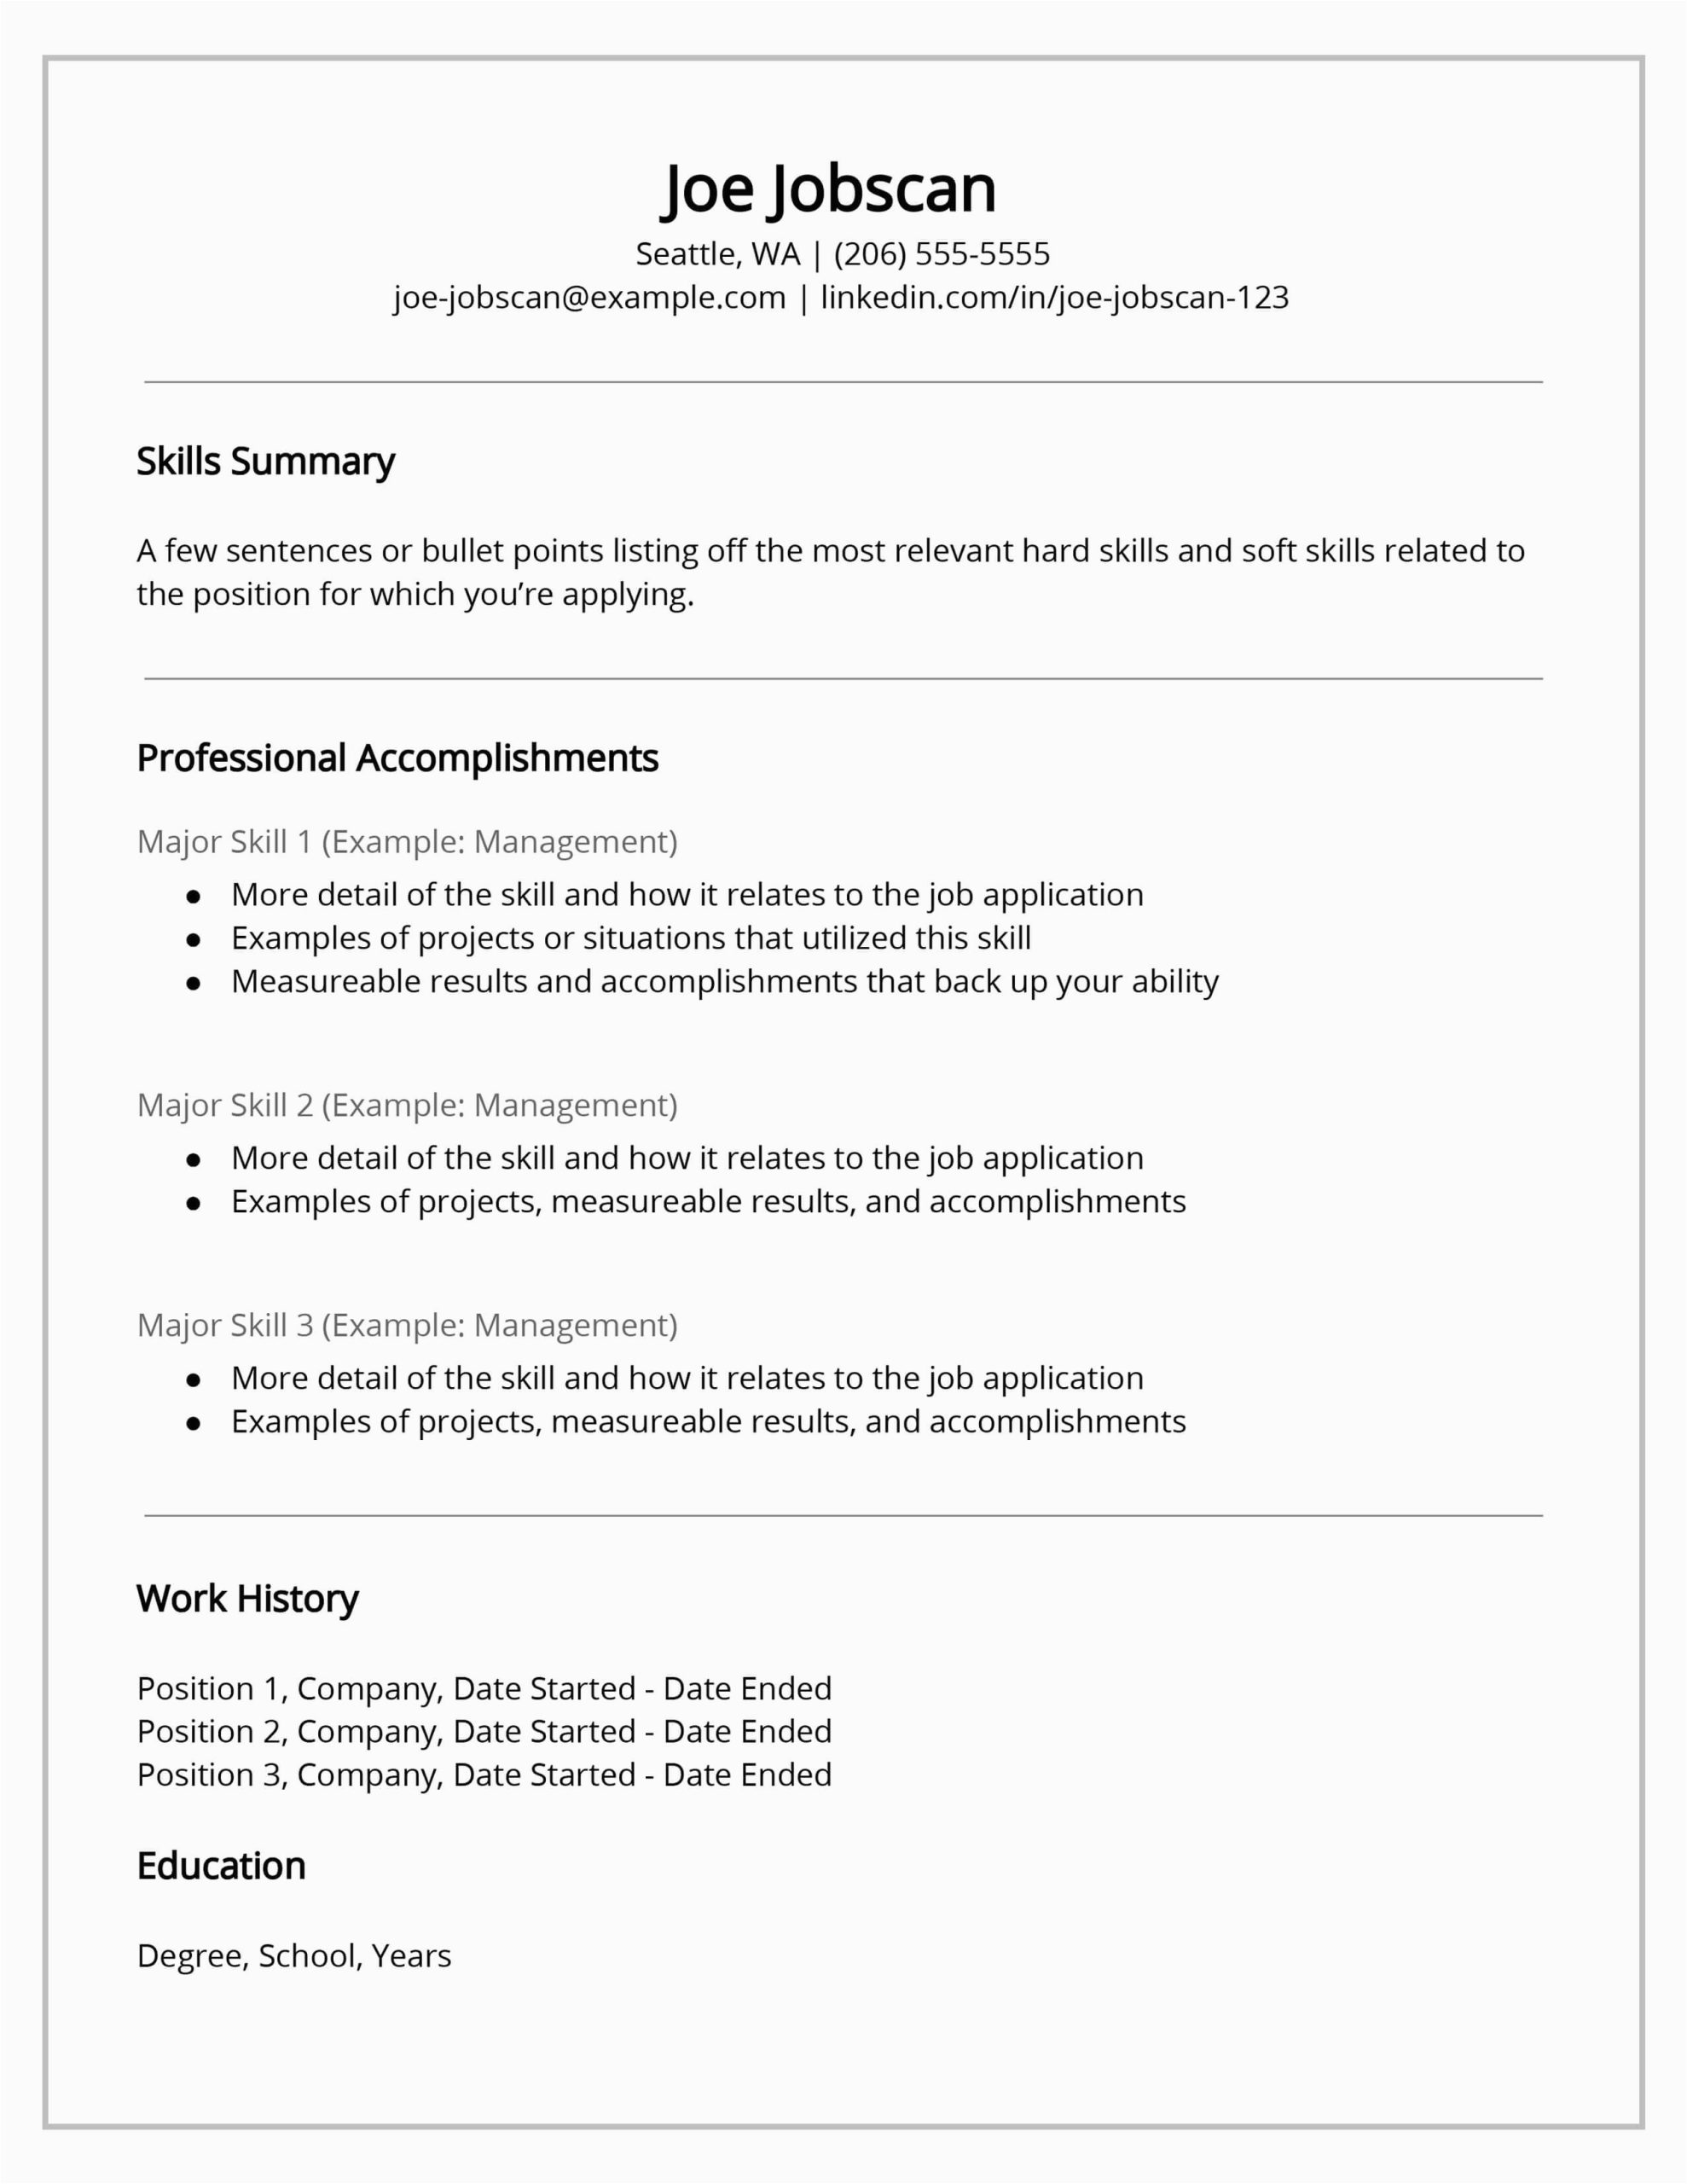 Resume Samples Example Of Resume to Apply Job Job Resume format for 2018